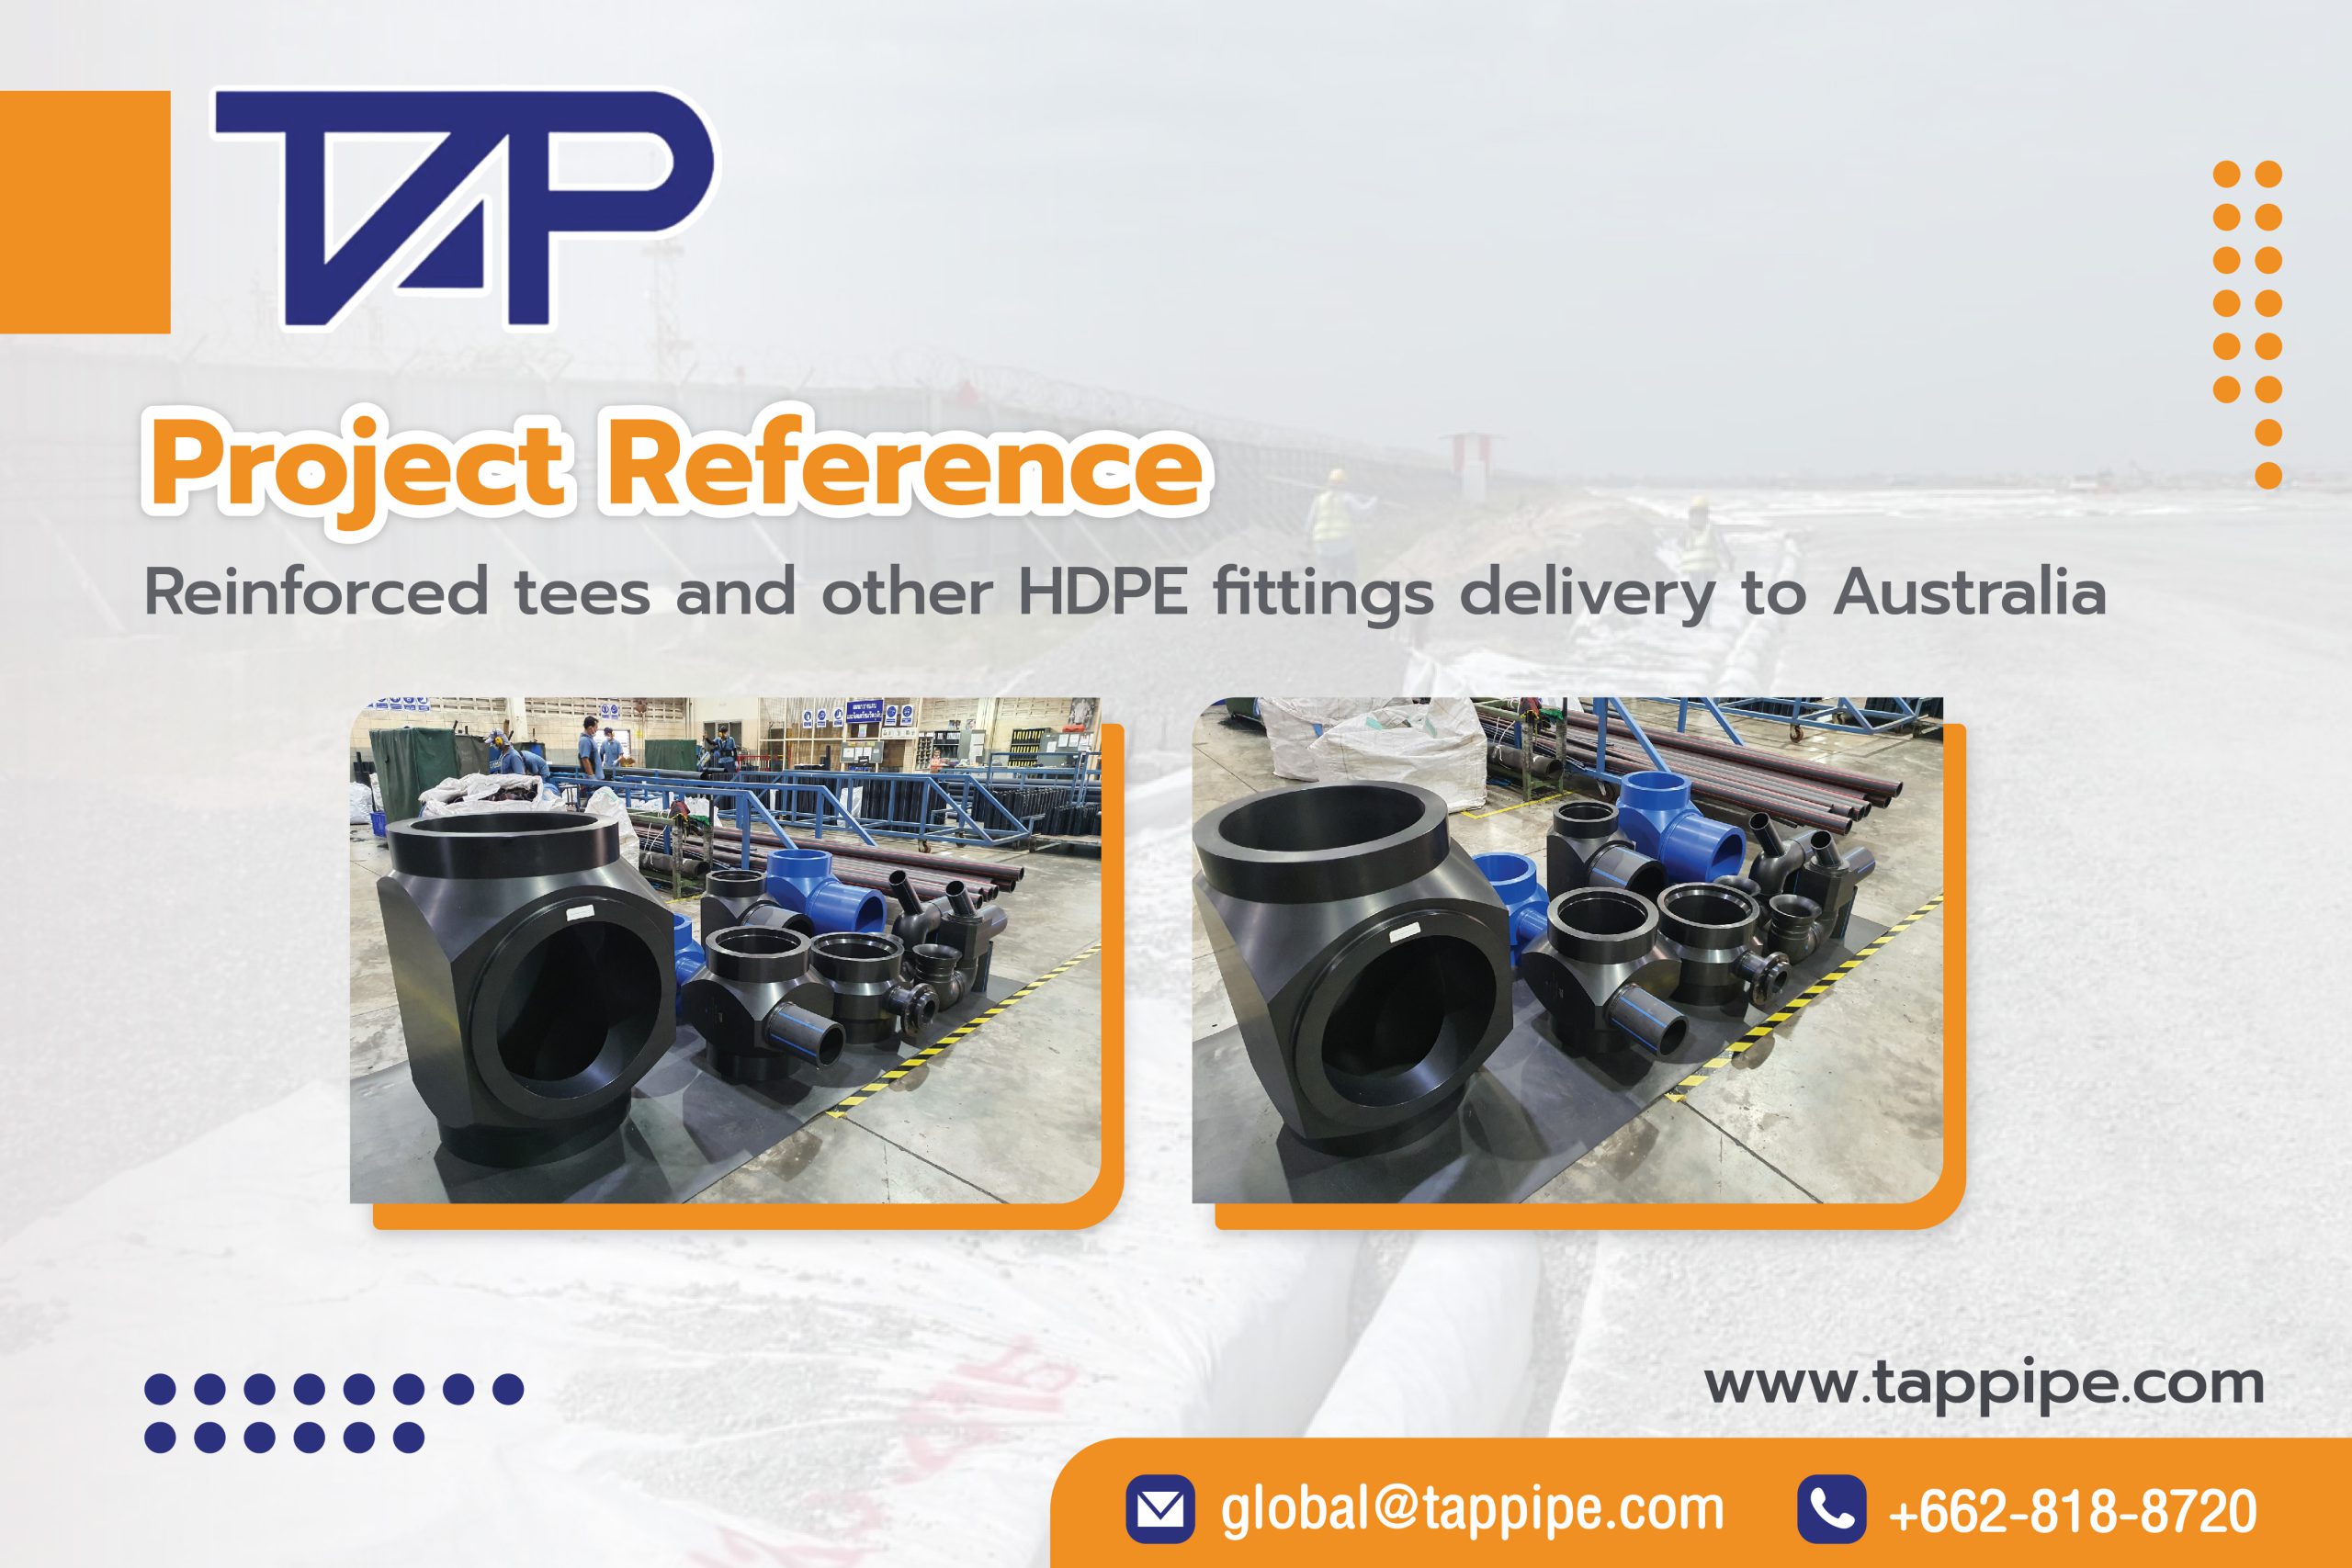 Cover: Reinforced tees and other HDPE fittings delivery to Australia